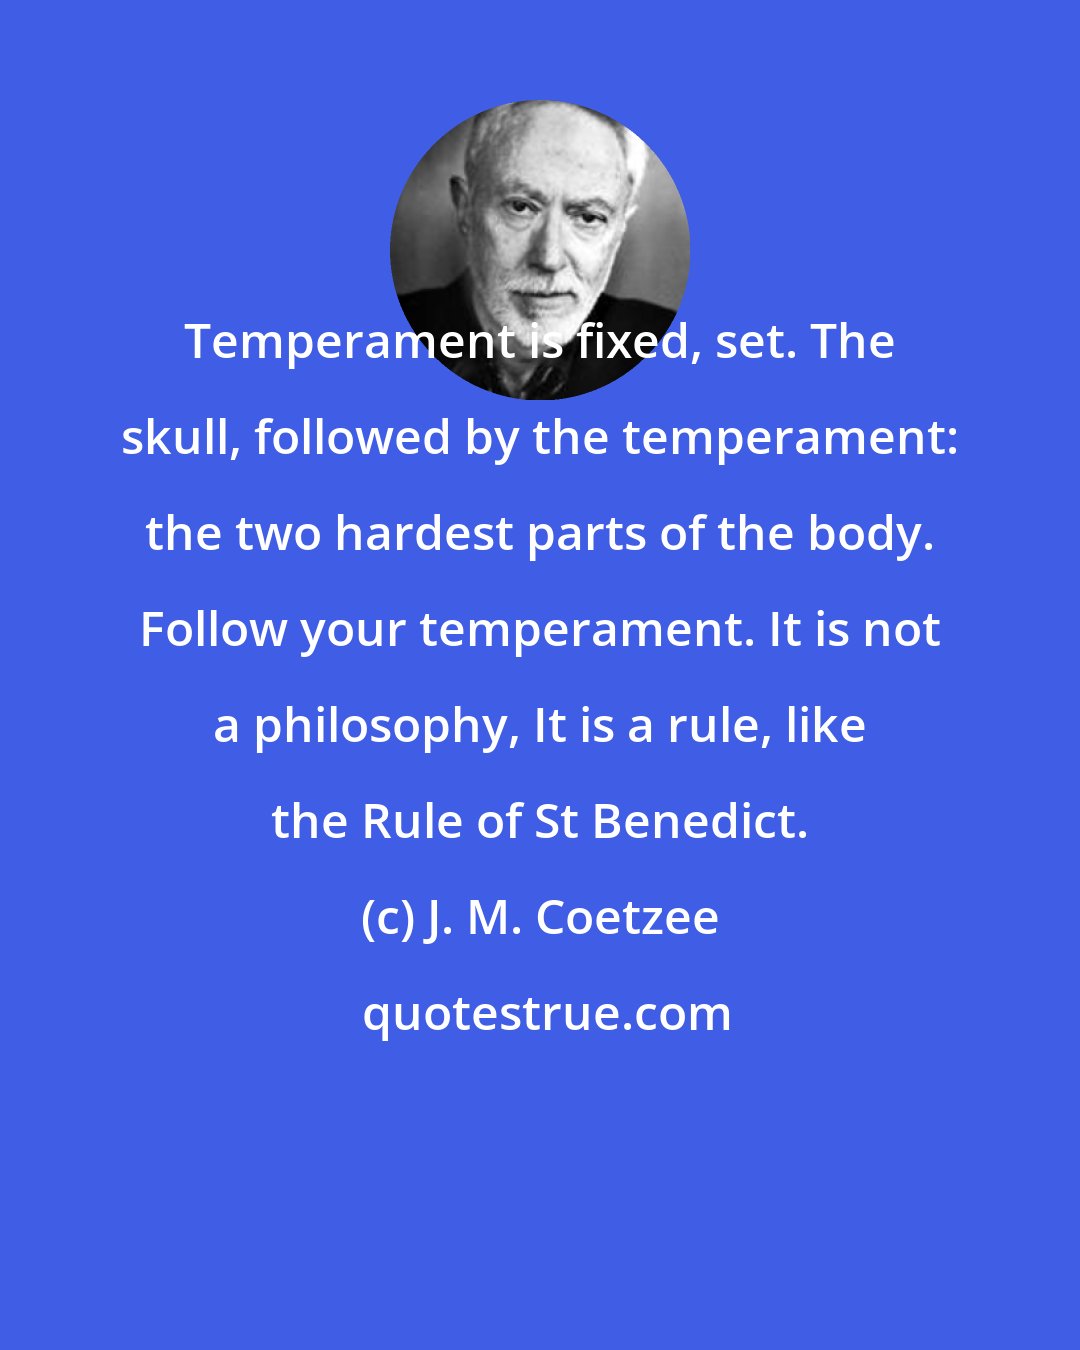 J. M. Coetzee: Temperament is fixed, set. The skull, followed by the temperament: the two hardest parts of the body. Follow your temperament. It is not a philosophy, It is a rule, like the Rule of St Benedict.